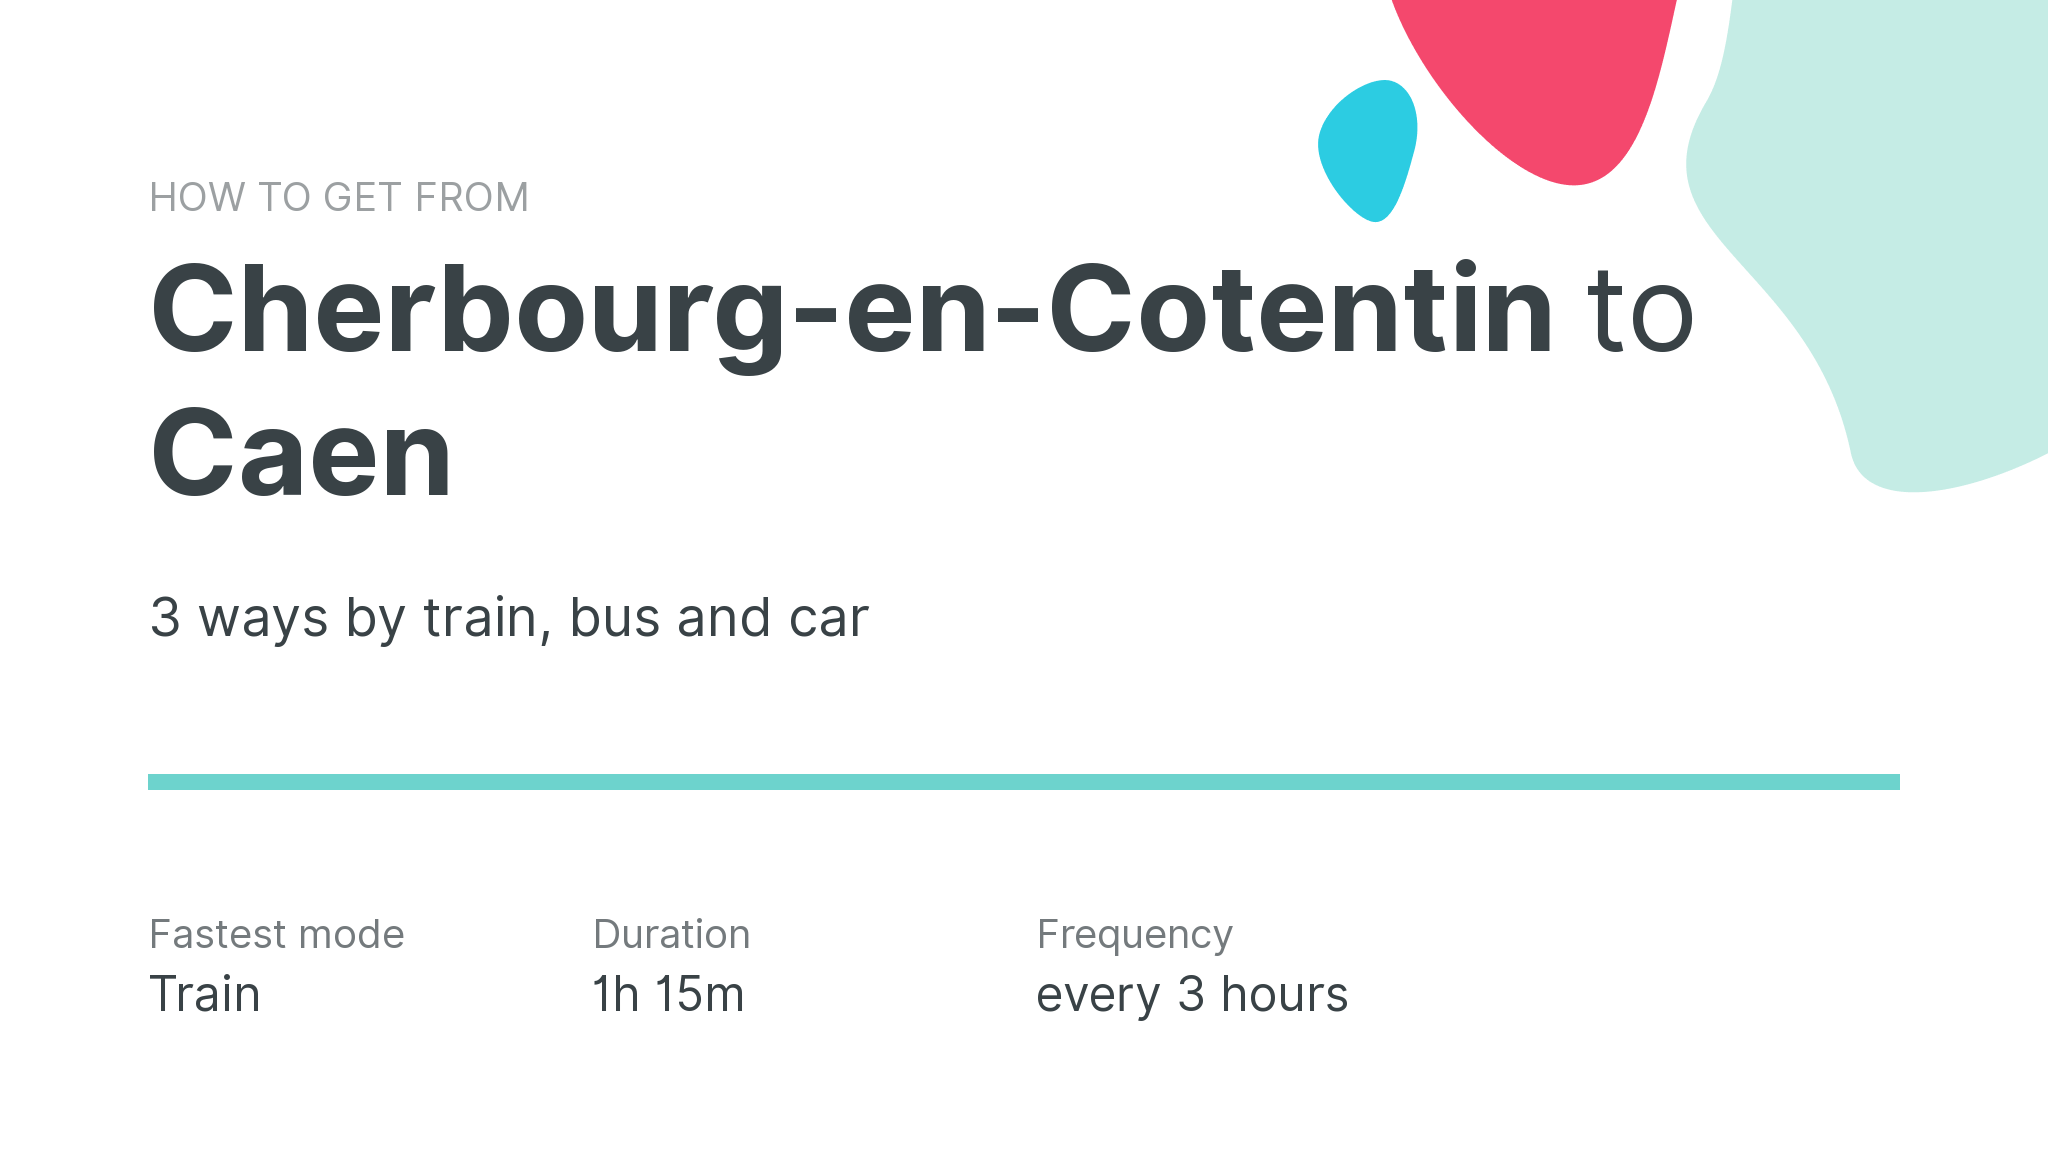 How do I get from Cherbourg-en-Cotentin to Caen